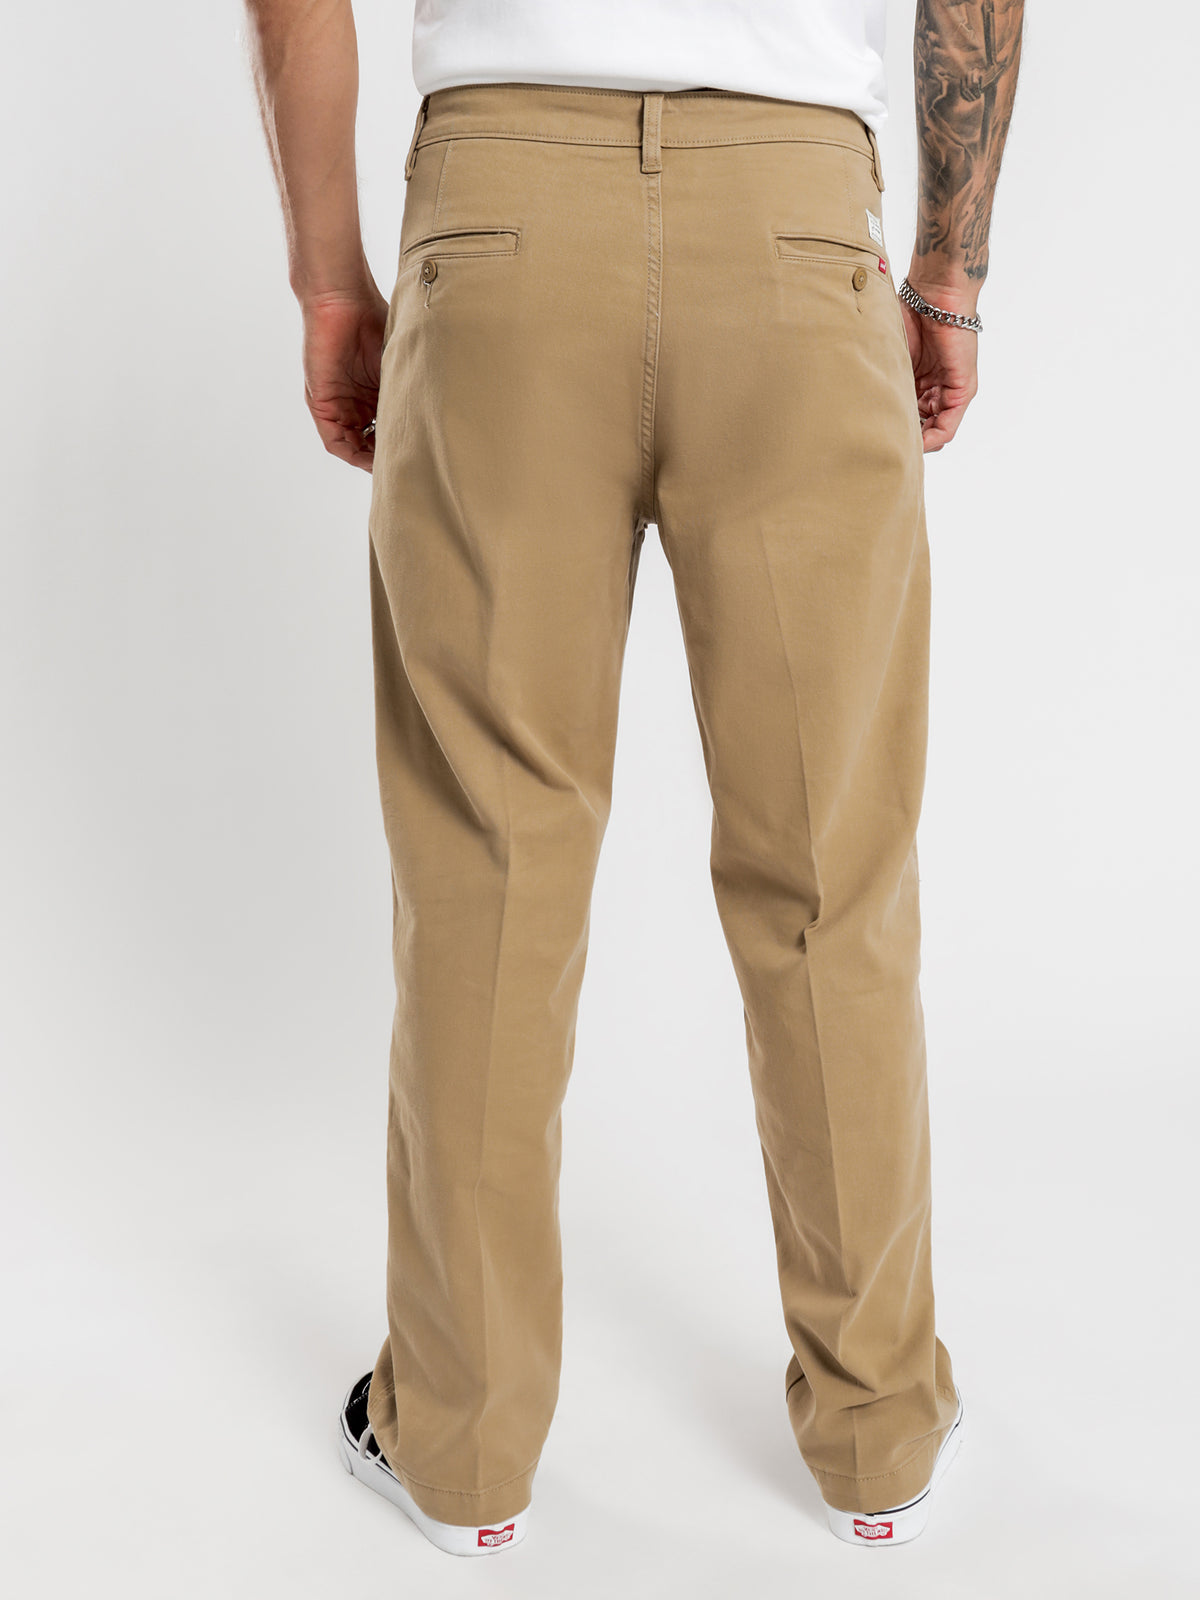 XX Chino Stay Loose Pants in Beige